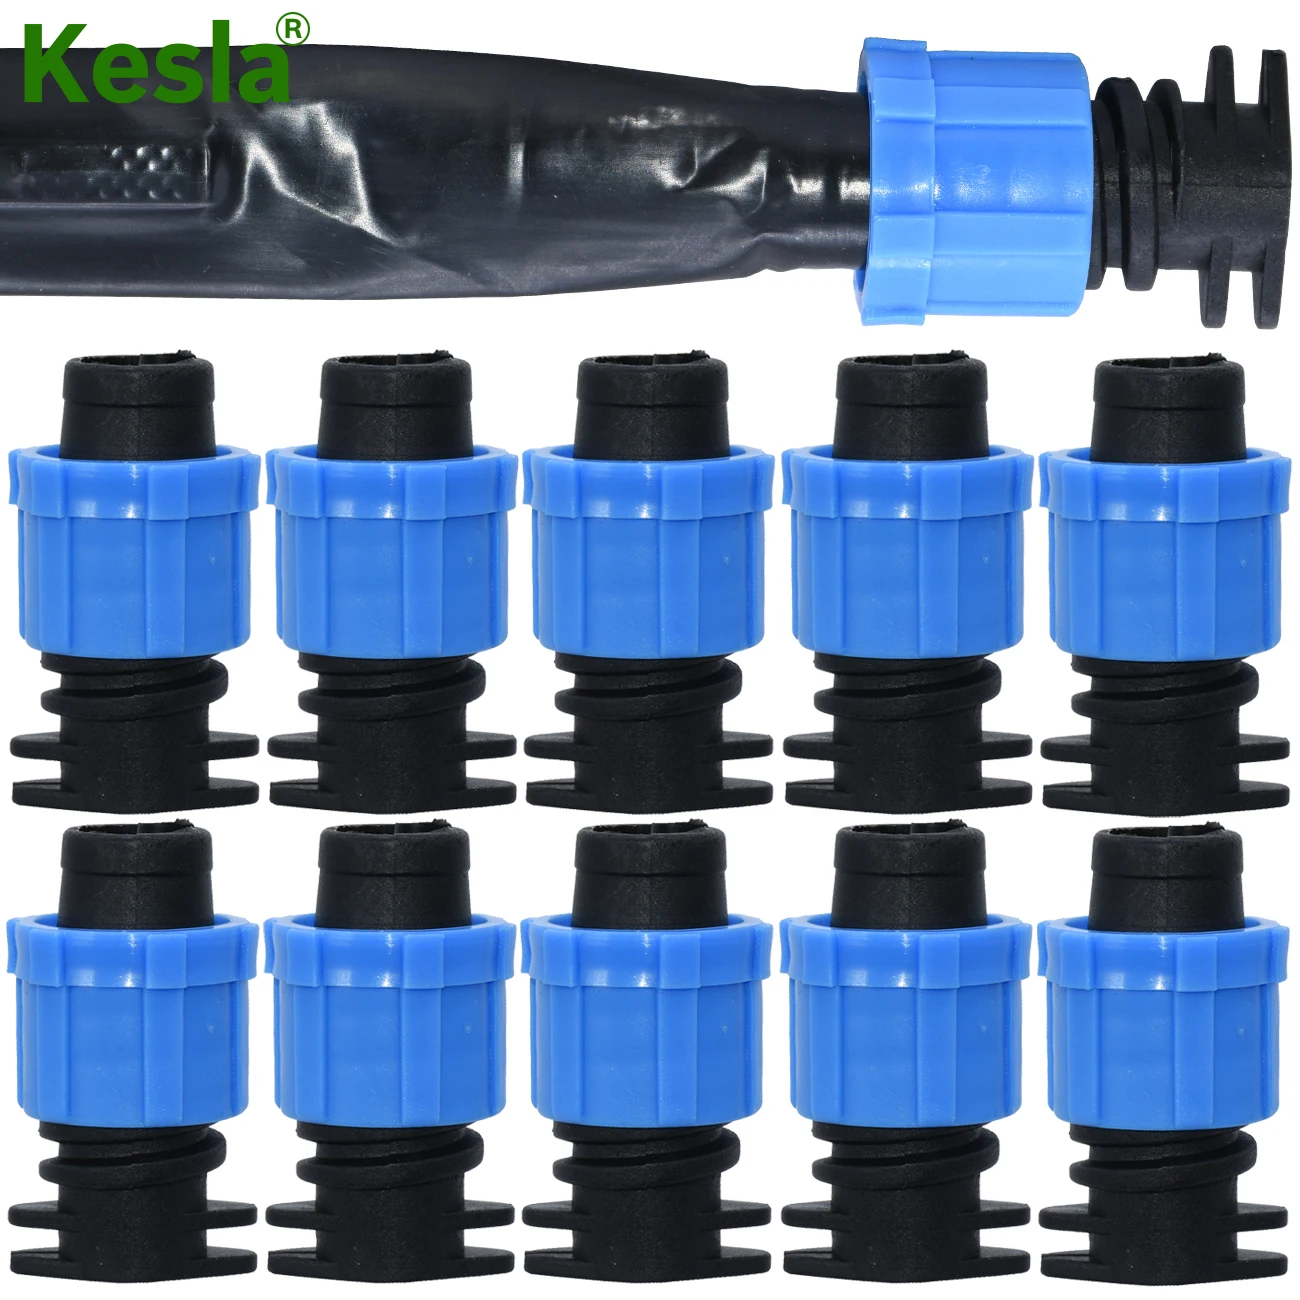 KESLA 10PCS 16mm 5/8" Drip Irrigation Tape End Plug Pipe Fitting Connectors w Thread Lock for Garden Watering System Greenyhouse